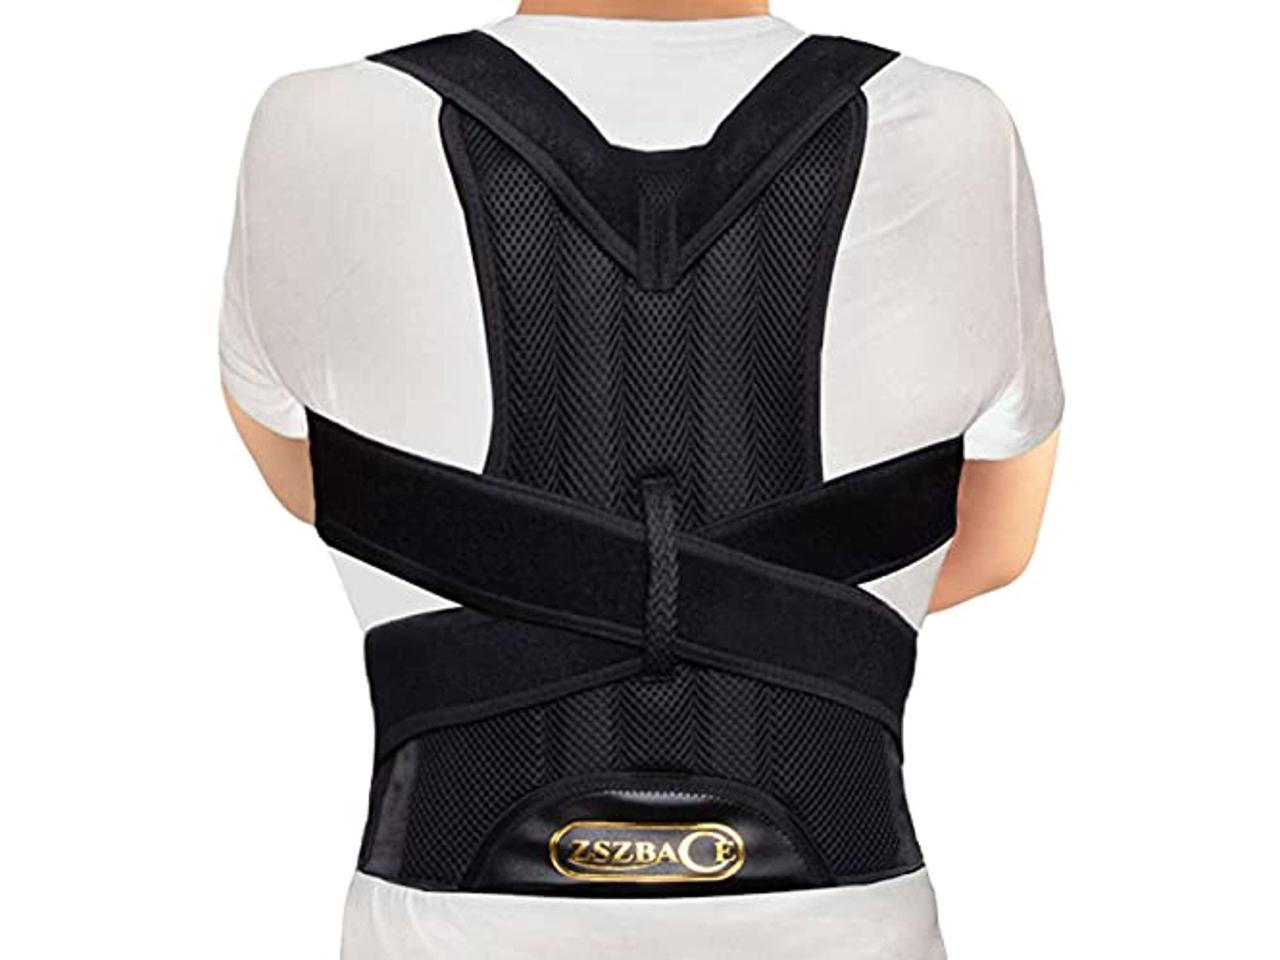 Aollop Posture Corrector for Men and Women Back Brace Lumbar Support with Breathable Adjustable Elastic Bands Support Bars Posture Improve Back Pain Association Lower Lumbar Relief Waist 27-51 